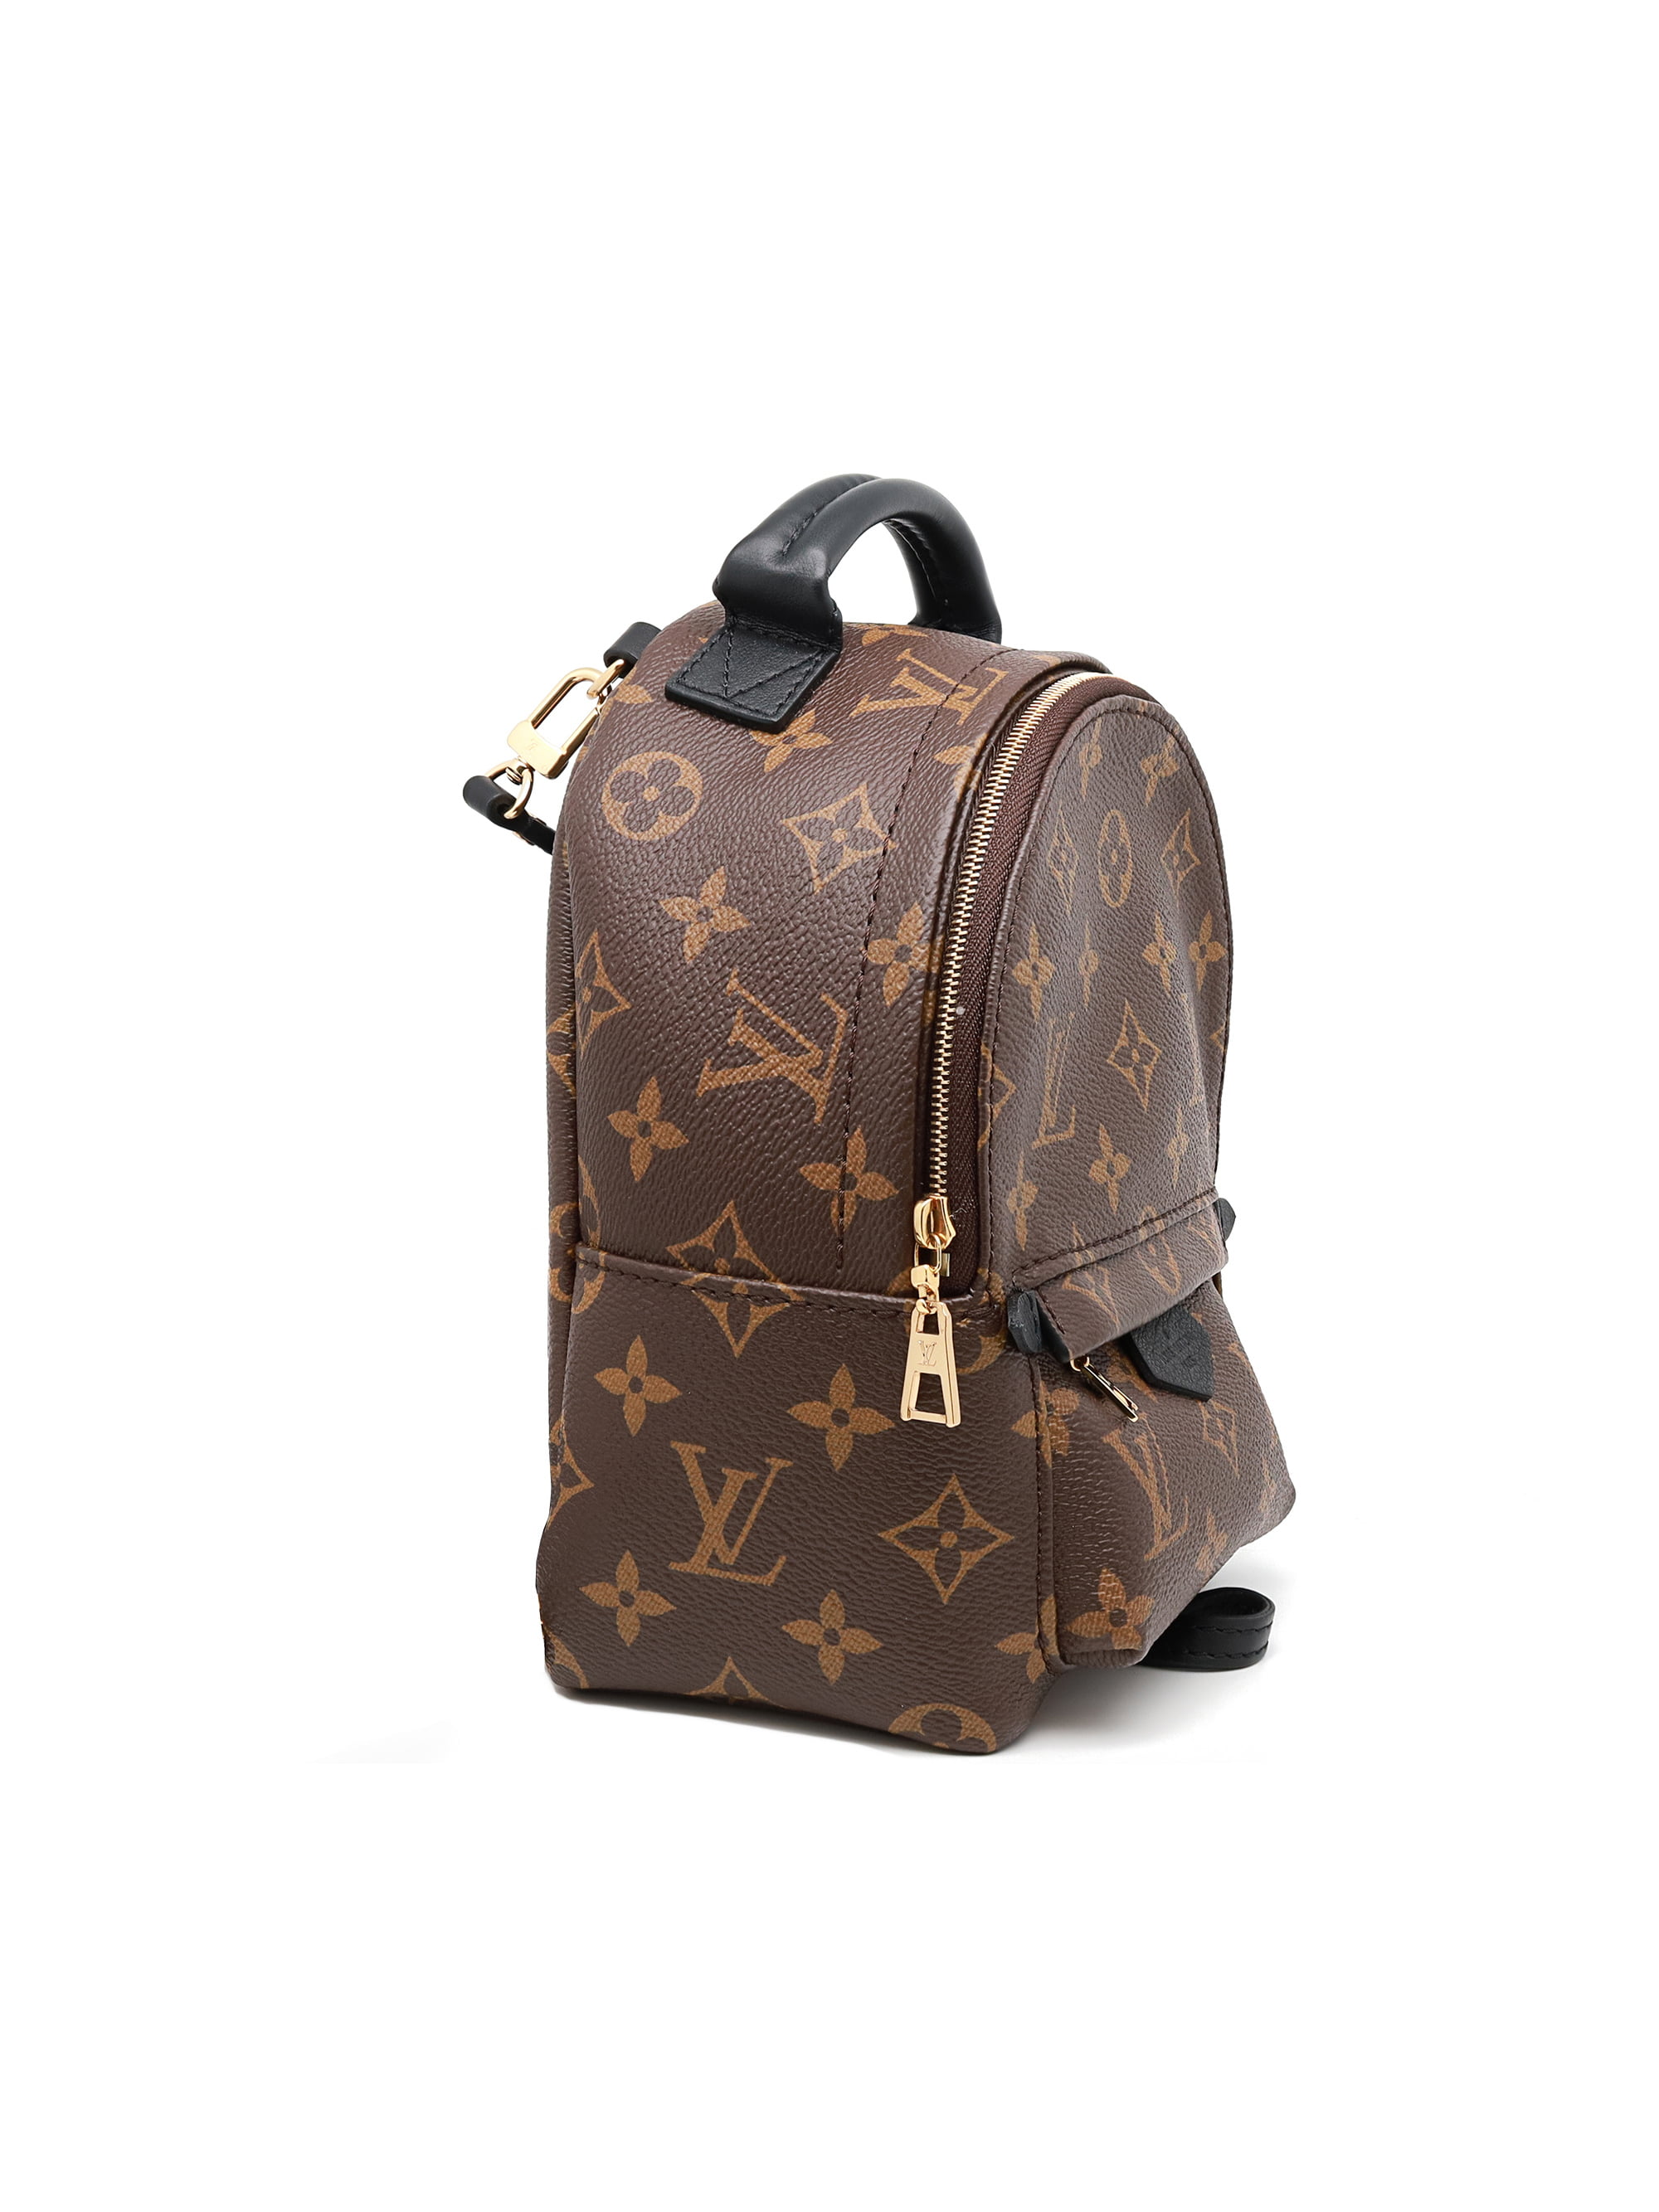 louis vuittons palm spring backpack mini